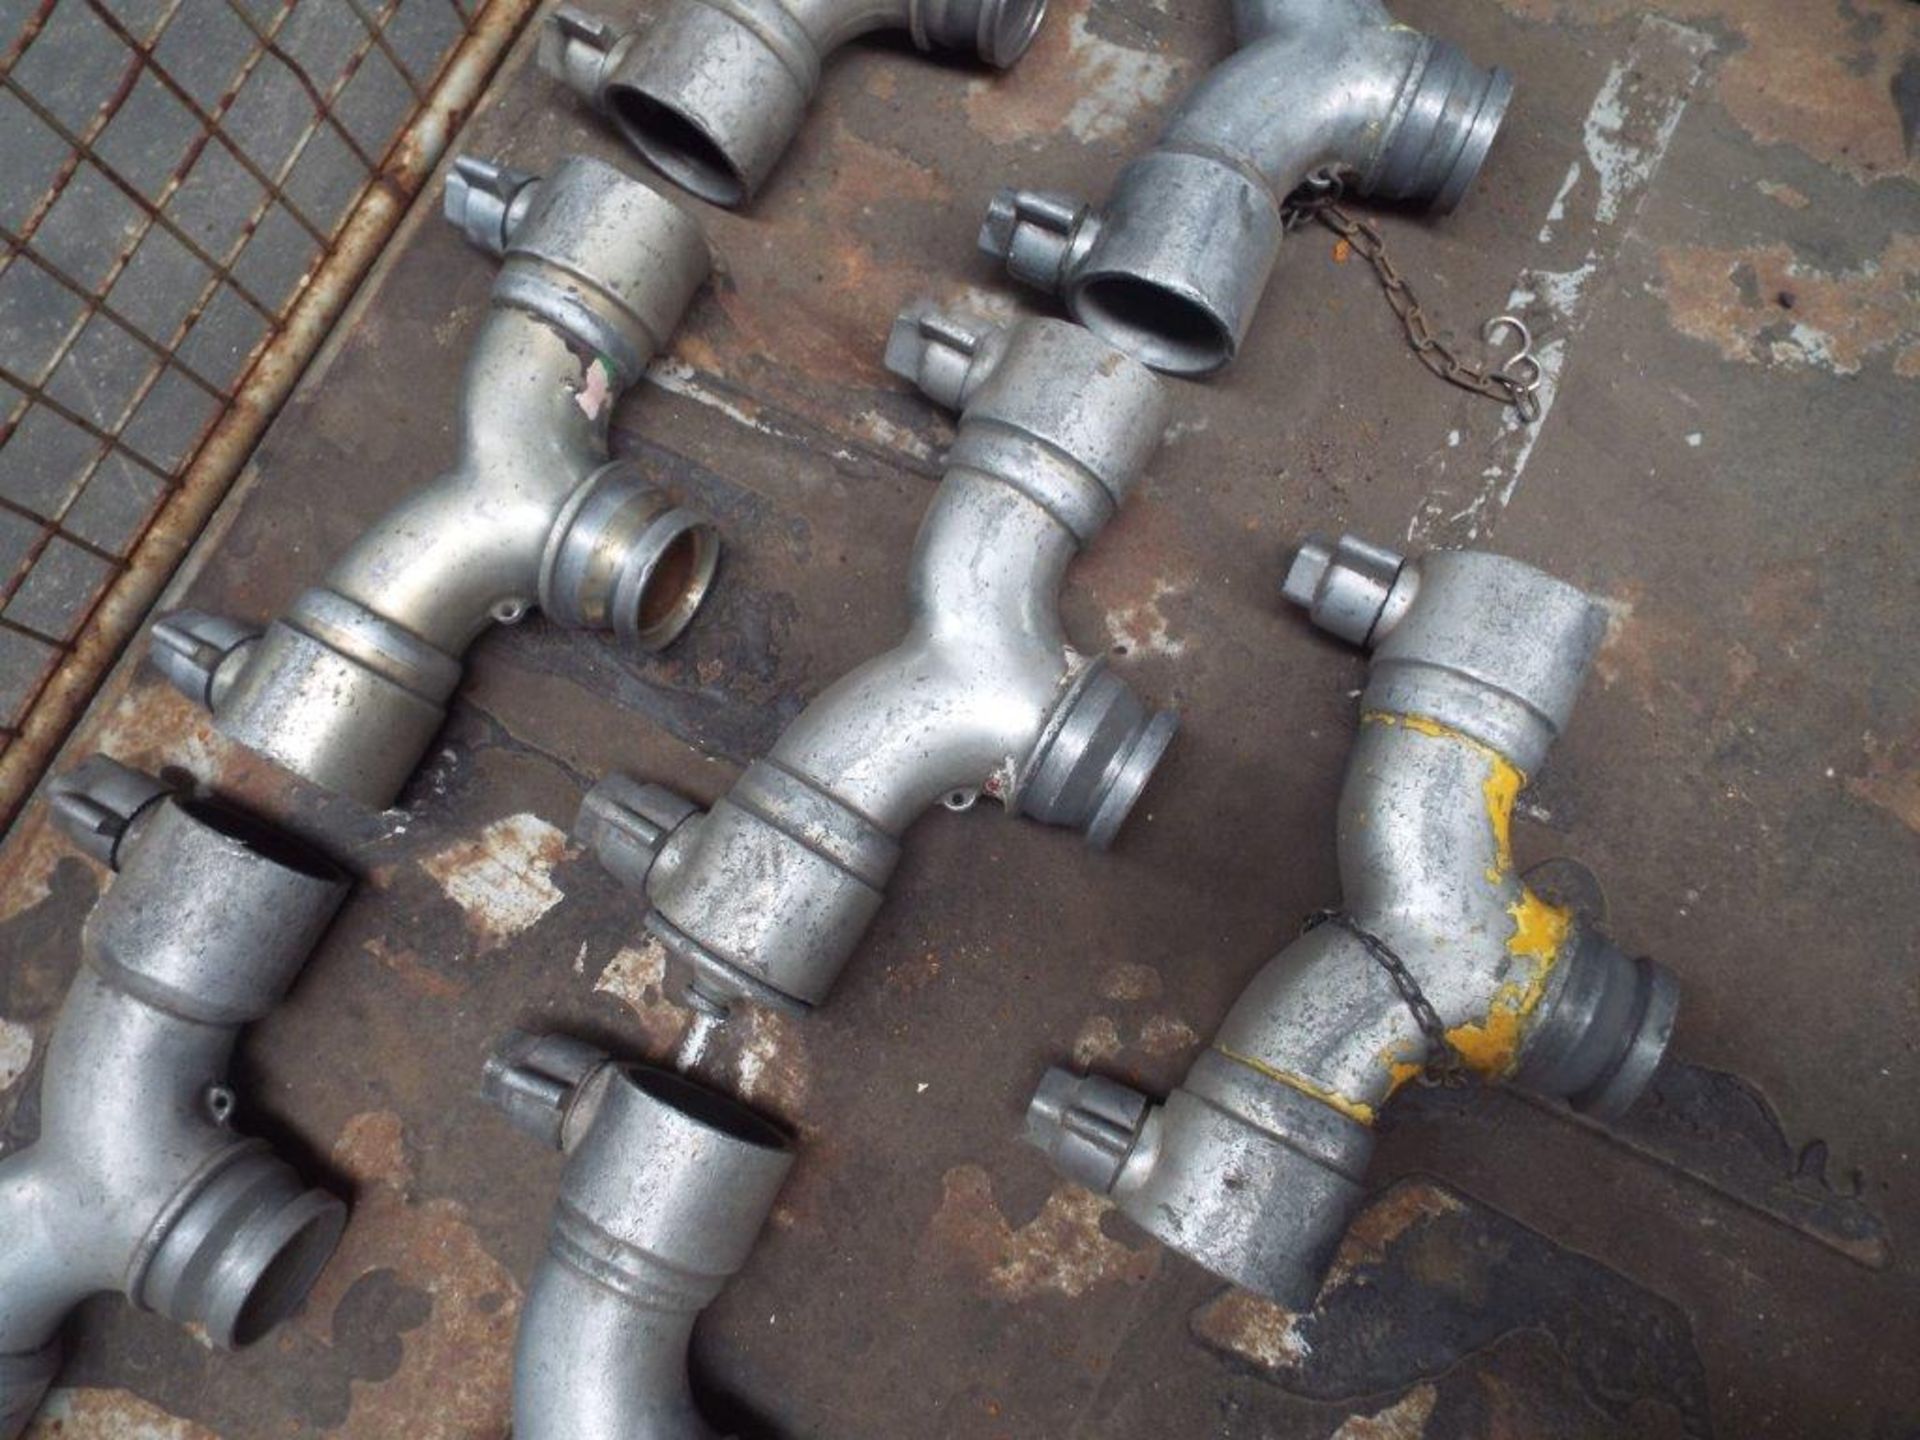 7 x Double Headed Standpipe Fittings - Image 3 of 5